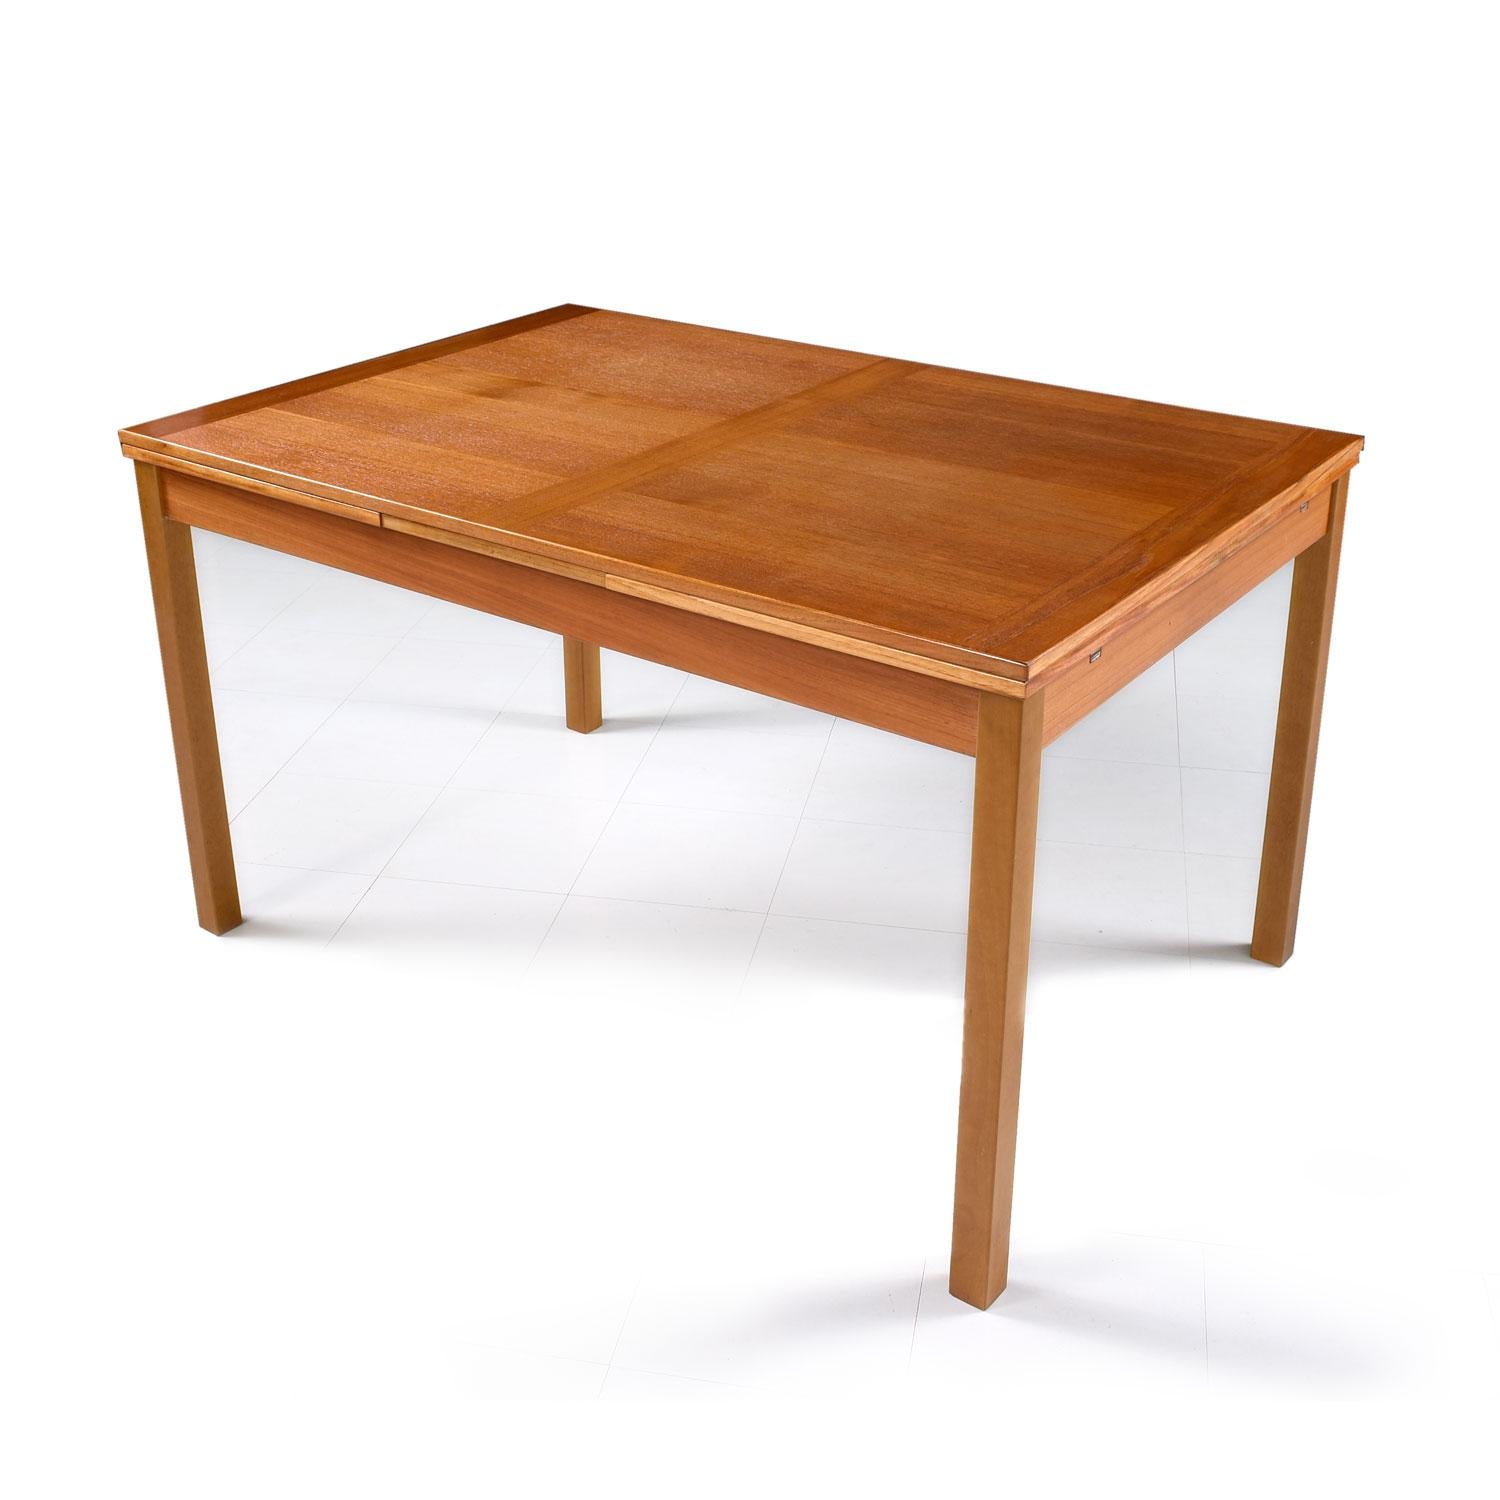 Made by Ansager Mobler, circa 1970s. The contrasting butcher block style wood grain on the leafs enhance the simple and Minimalist nature of this this Scandinavian design. Teak top with light colored beechwood legs. In the Classic style of Niels